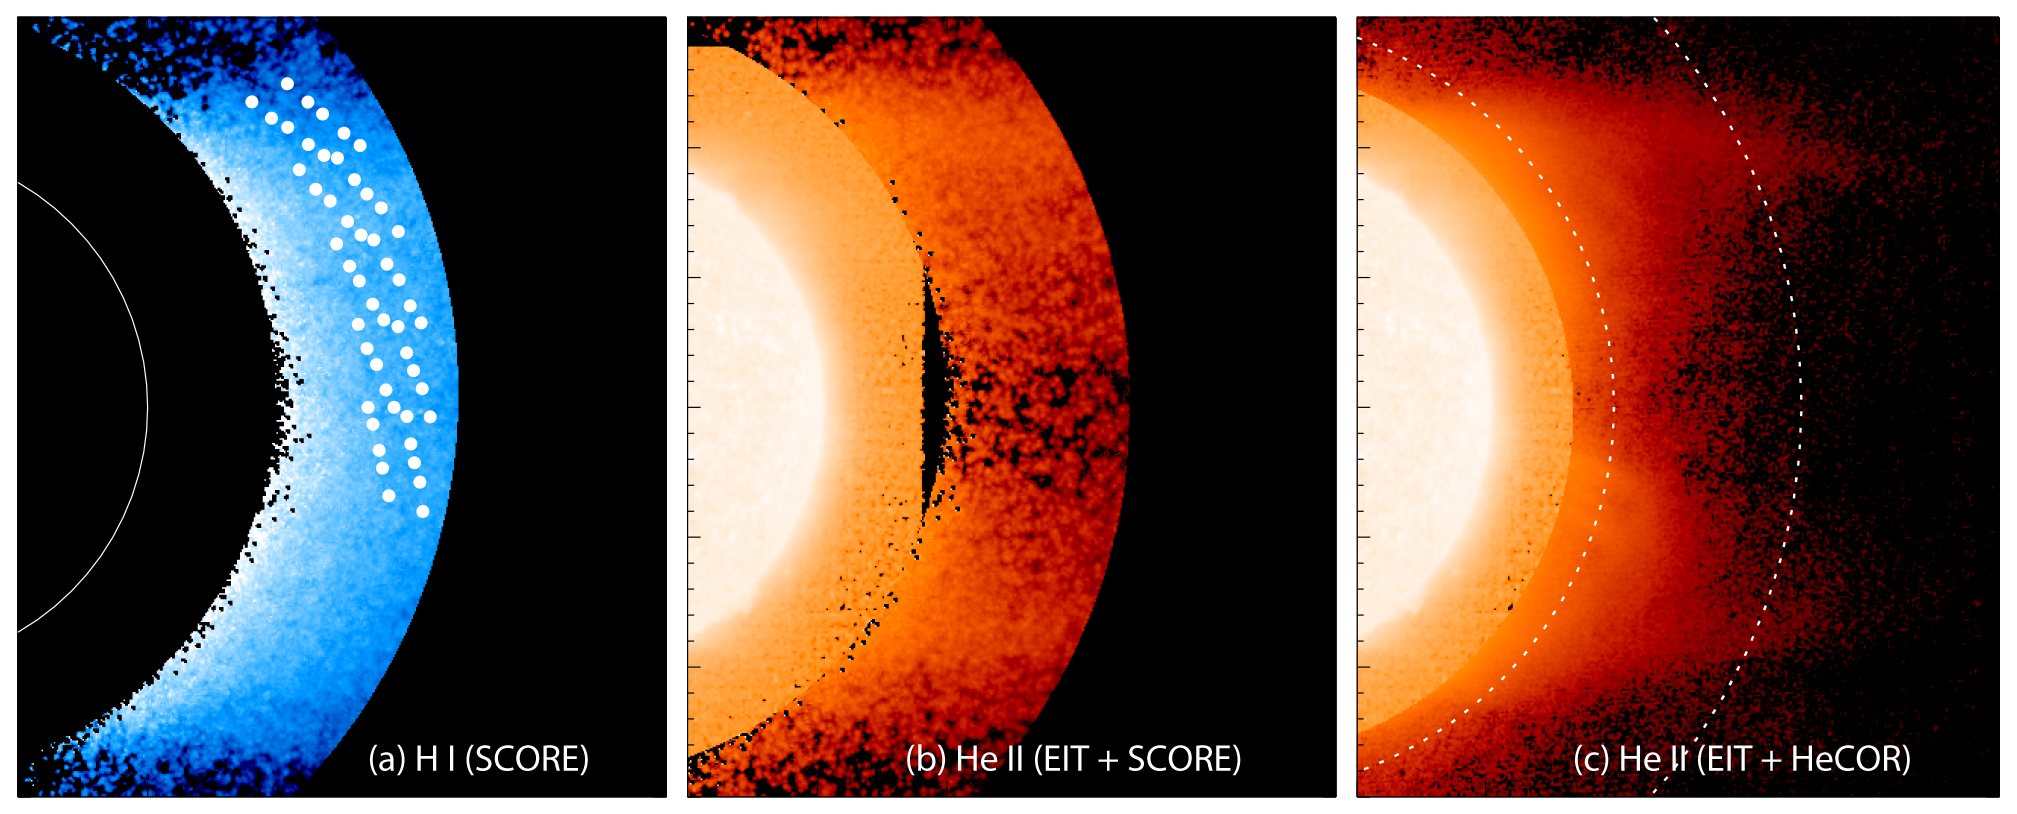 Three images depicting Sun's low corona, with hydrogen (left, in blue) and helium (center and right, in orange) concentrations